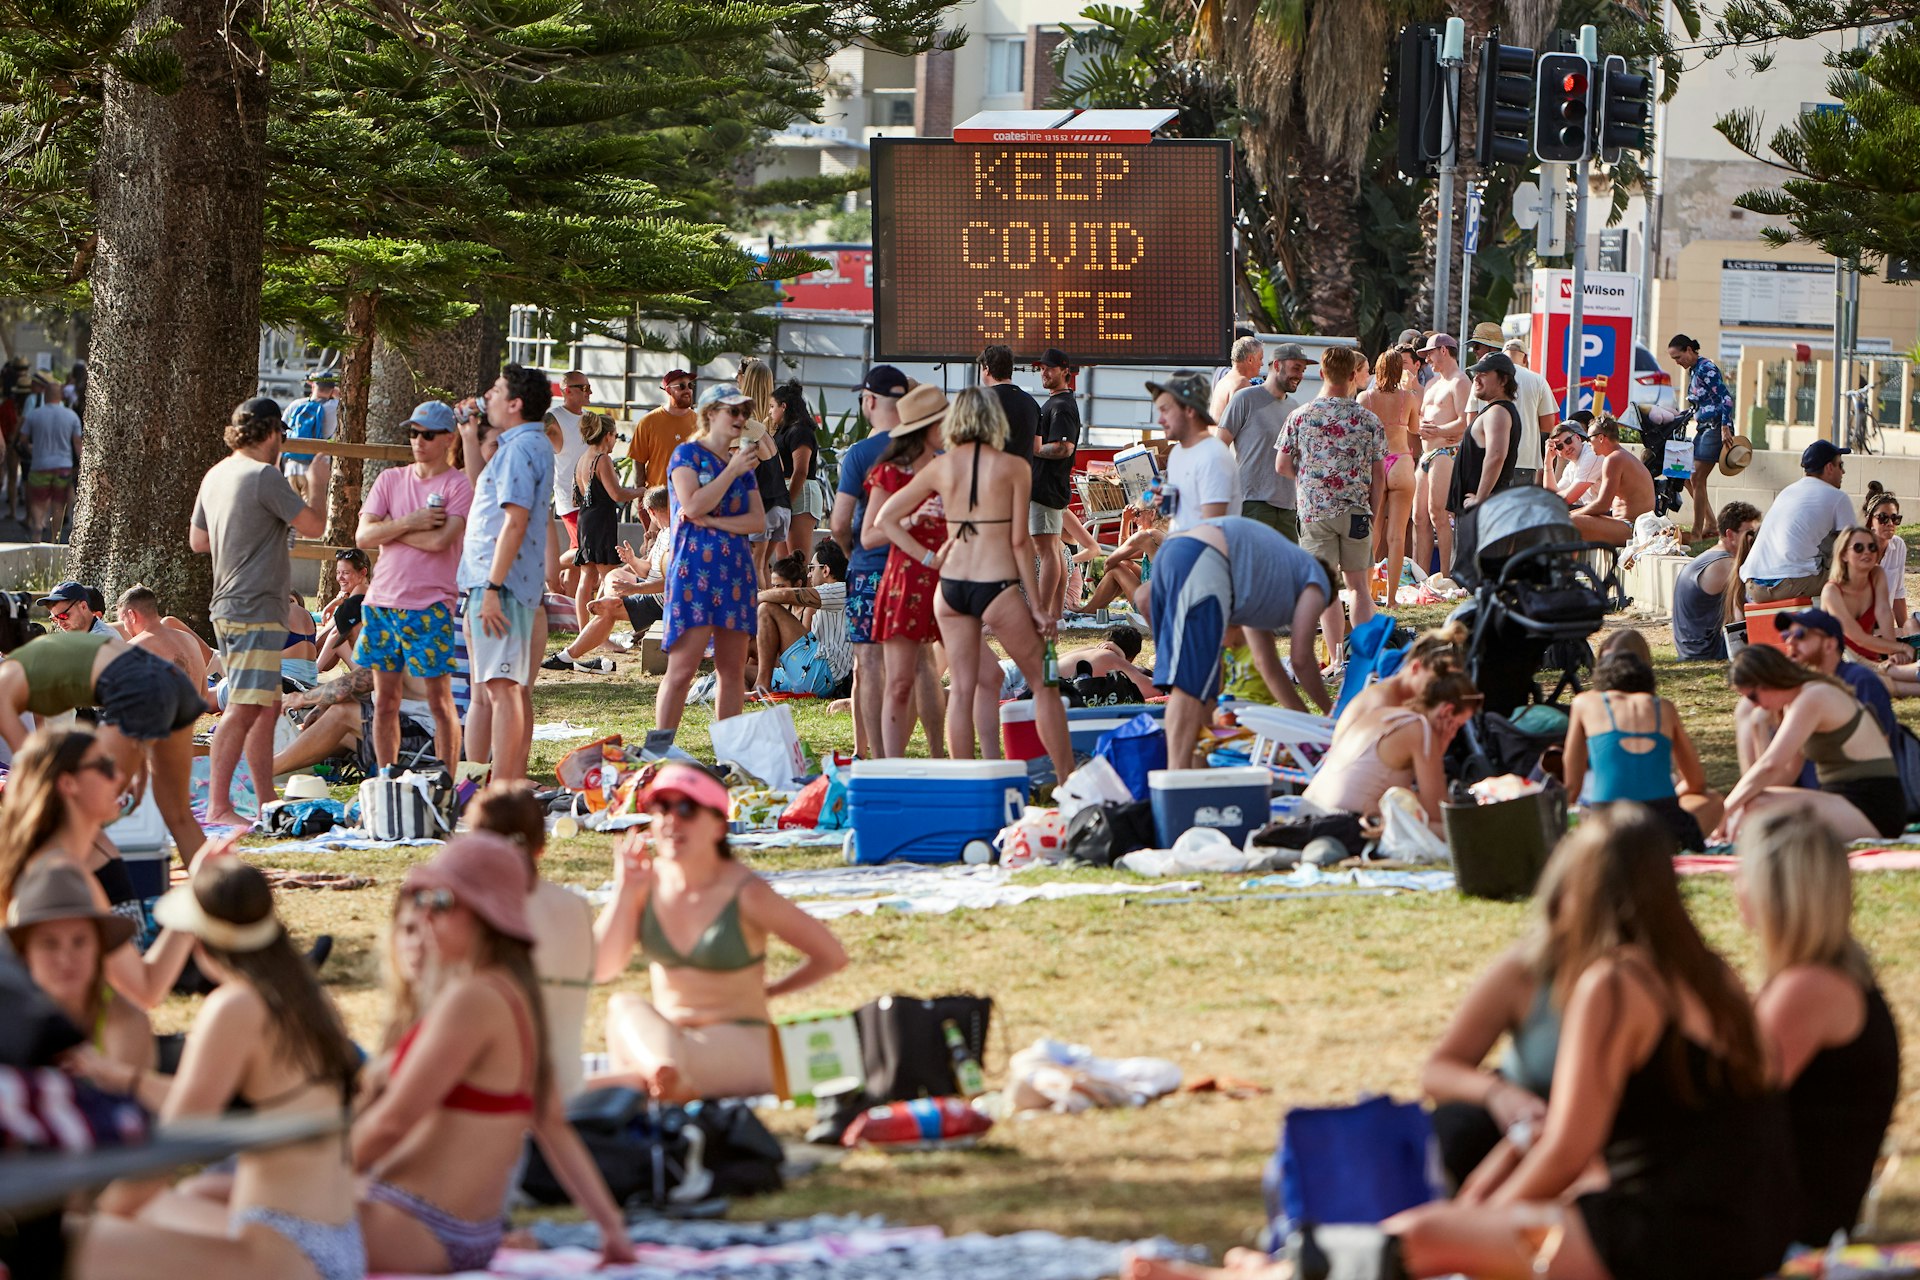 A busy beach in Australia, with a digital sign in the background saying "Keep COVID safe"